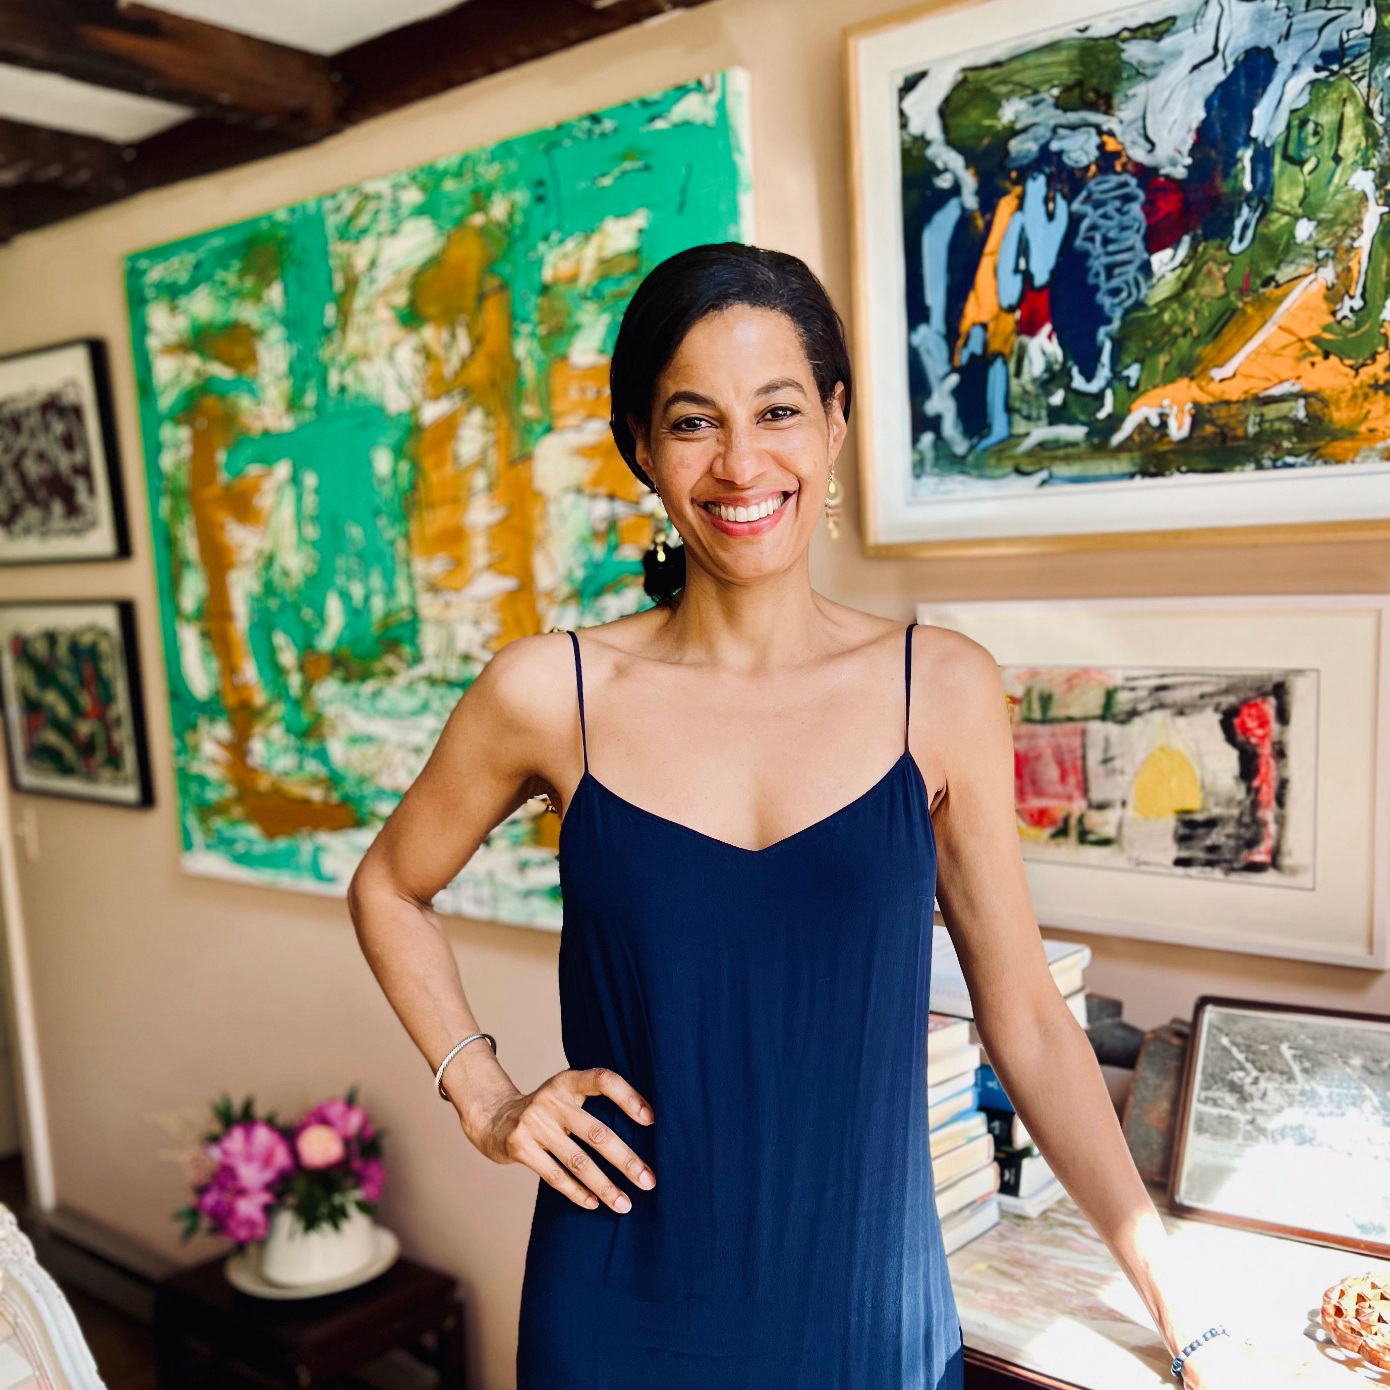 Woman smiling in front of paintings.